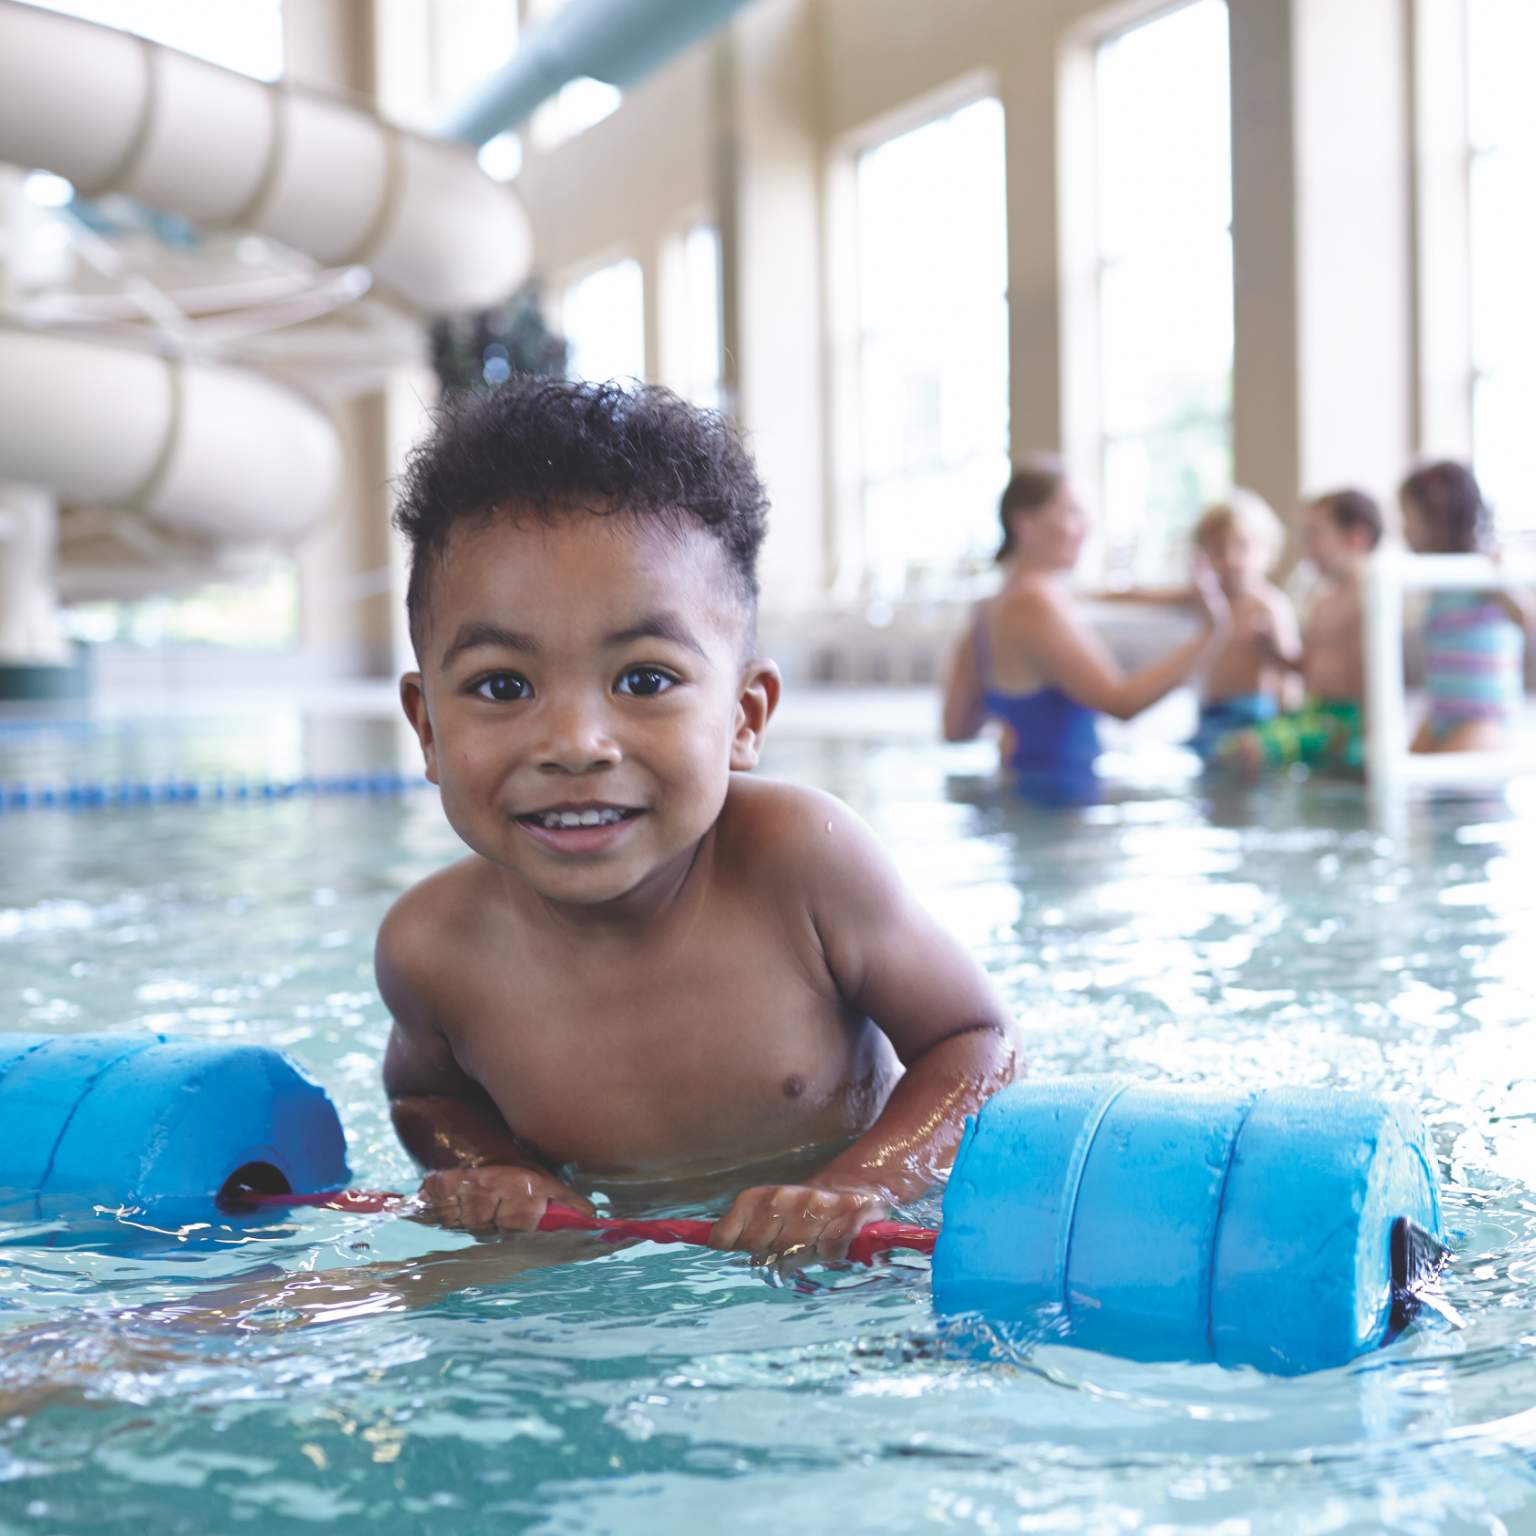 A toddler uses floating aid to learn how to swim at Life Time.